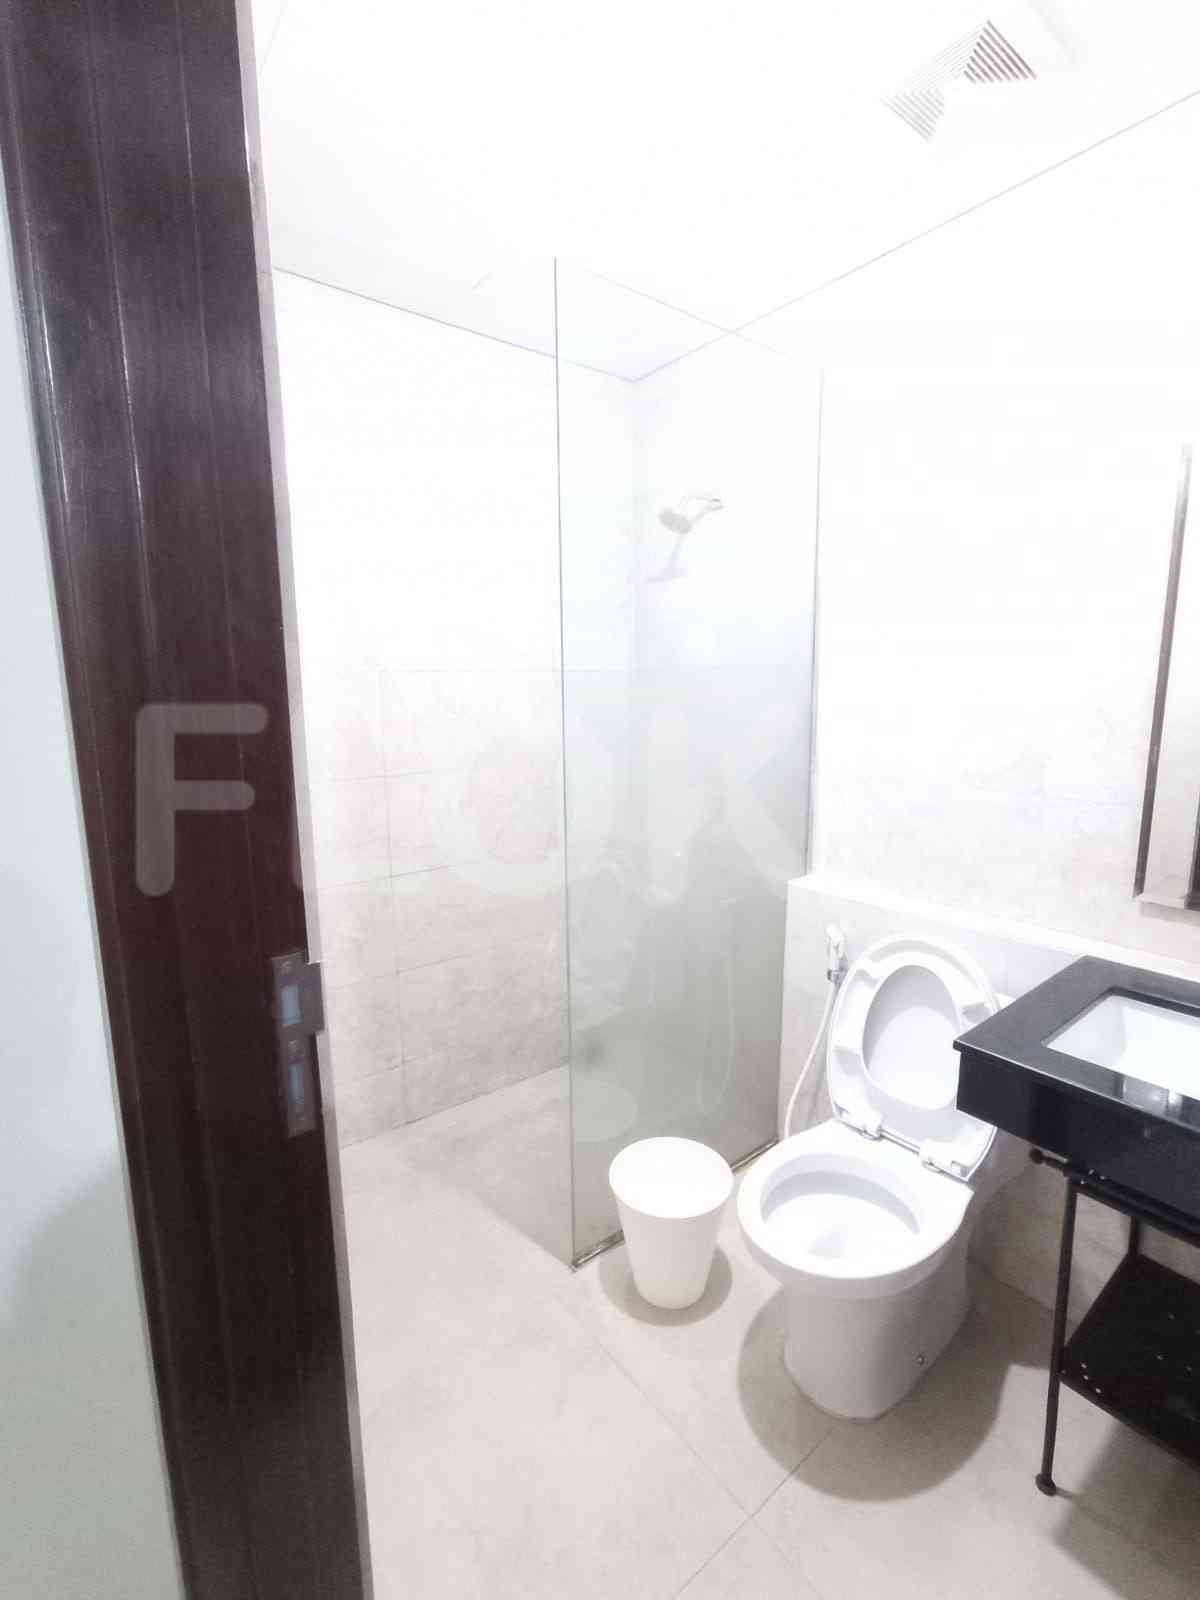 2 Bedroom on 8th Floor for Rent in Lavanue Apartment - fpad34 7